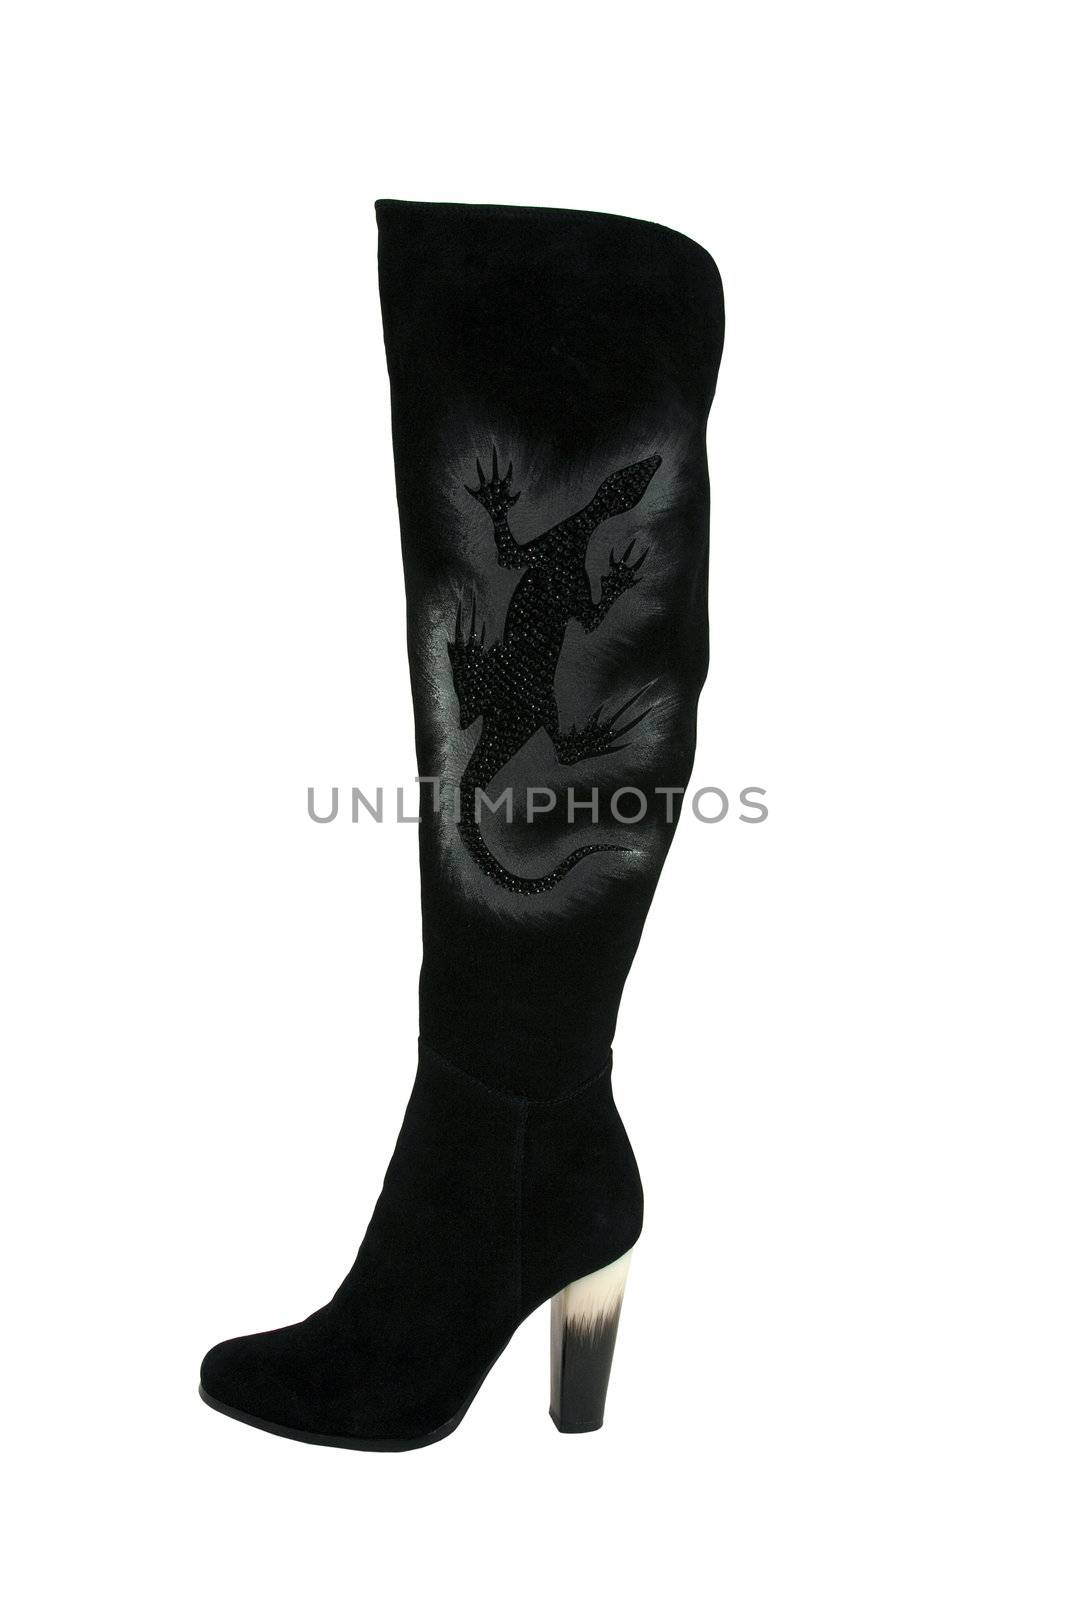 Ladies' high boot with drawing of a salamander by Jaklin